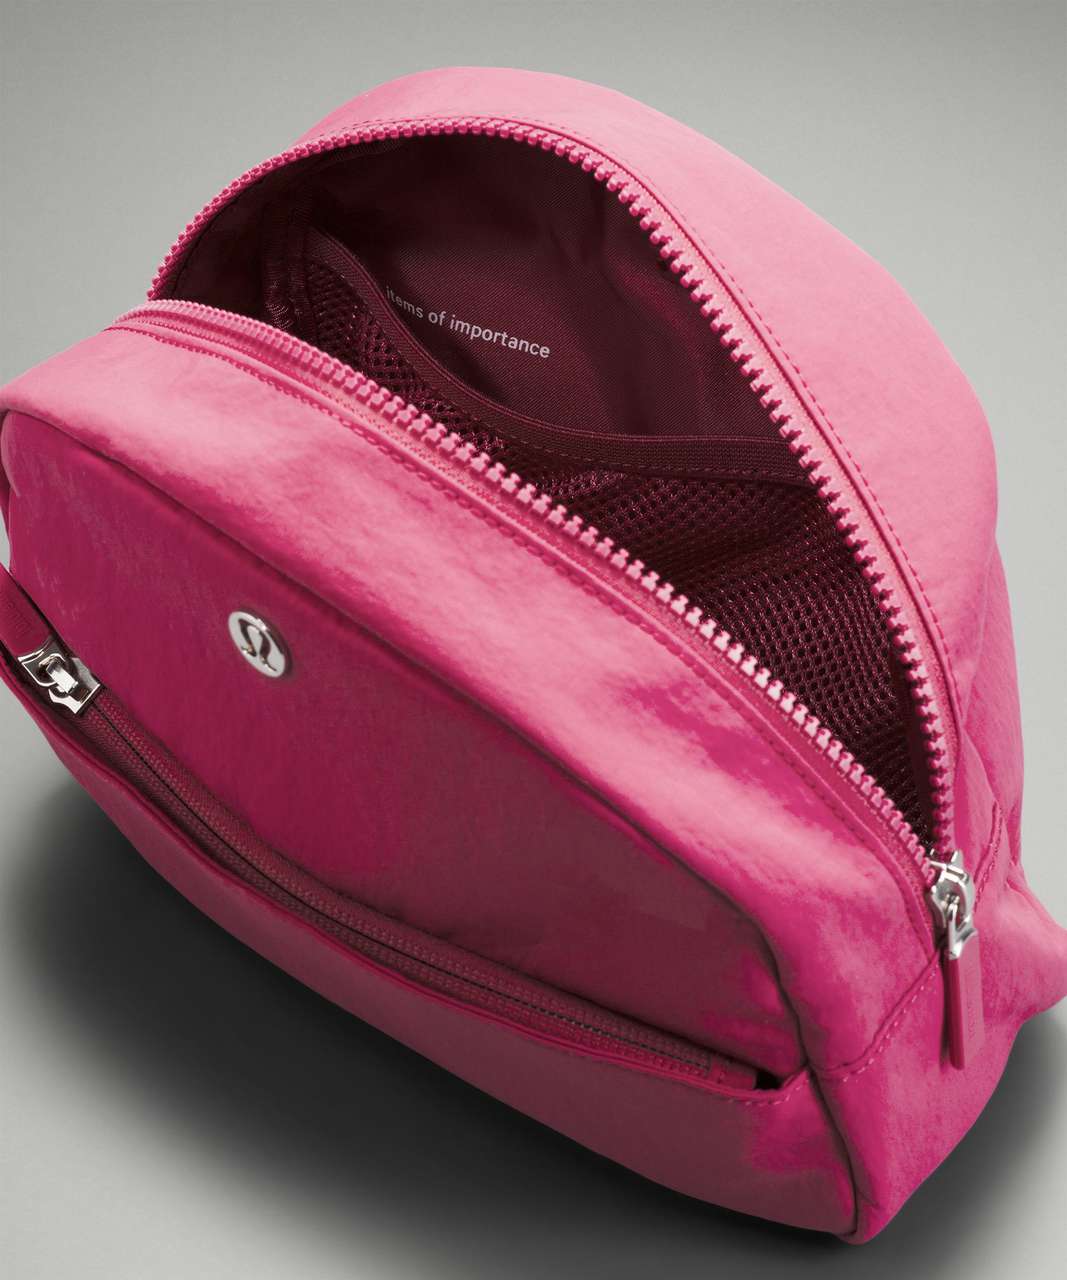 Lululemon Double-Zip Pouch - Pink Lychee